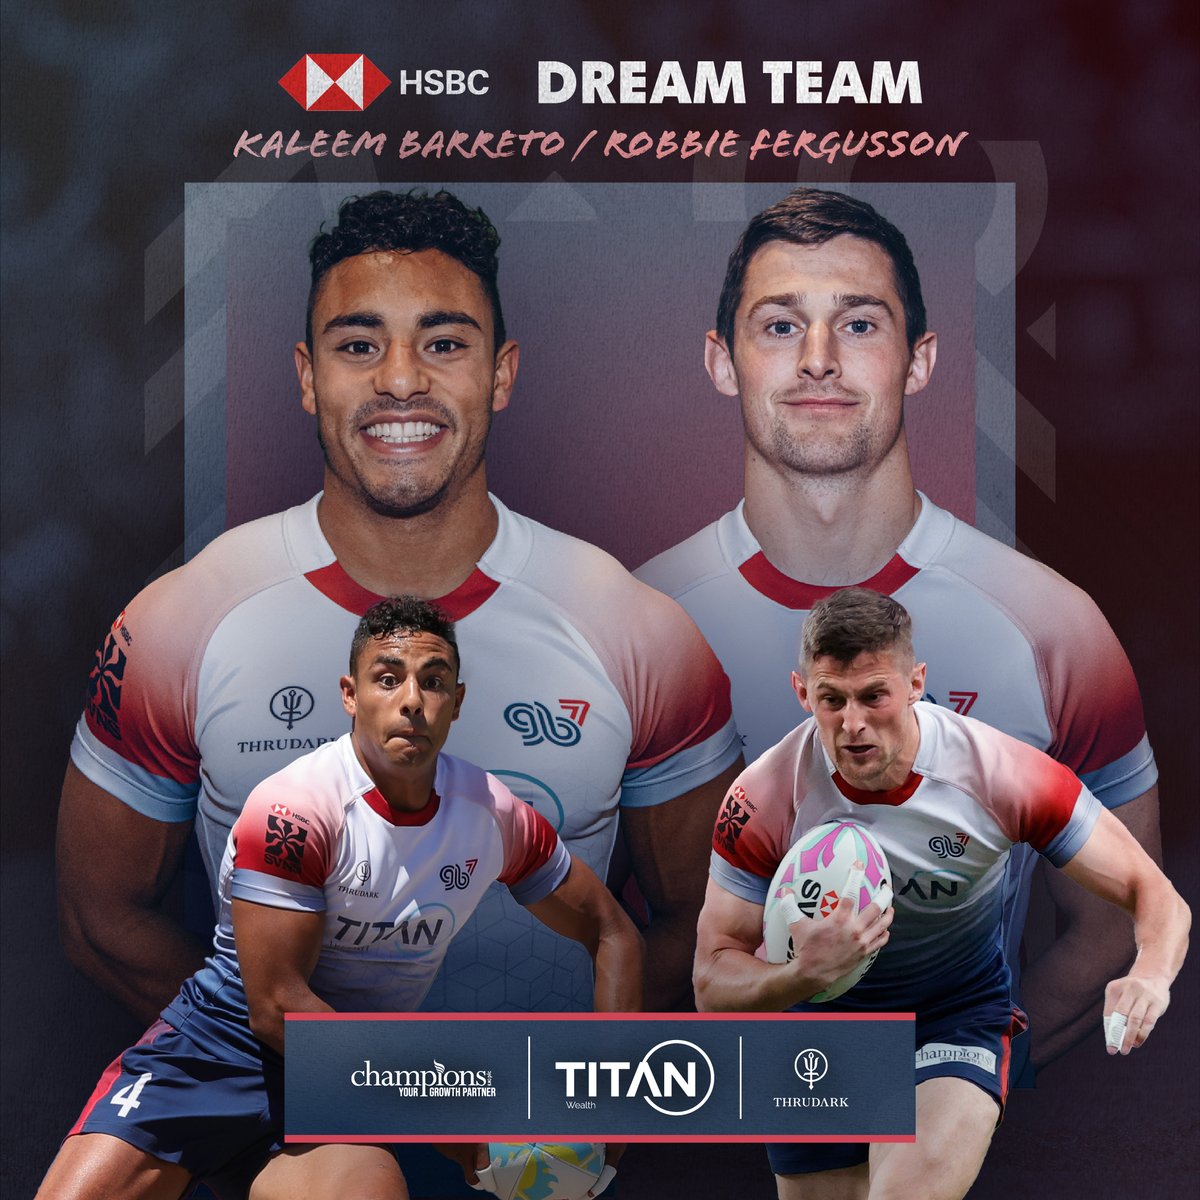 Introducing our HSBC Singapore dream team selections! Congratulations @kaleembarreto & @robbiefergusson 🎉 #GB7s #HSBCSVNS #HSBCSVNSSGP